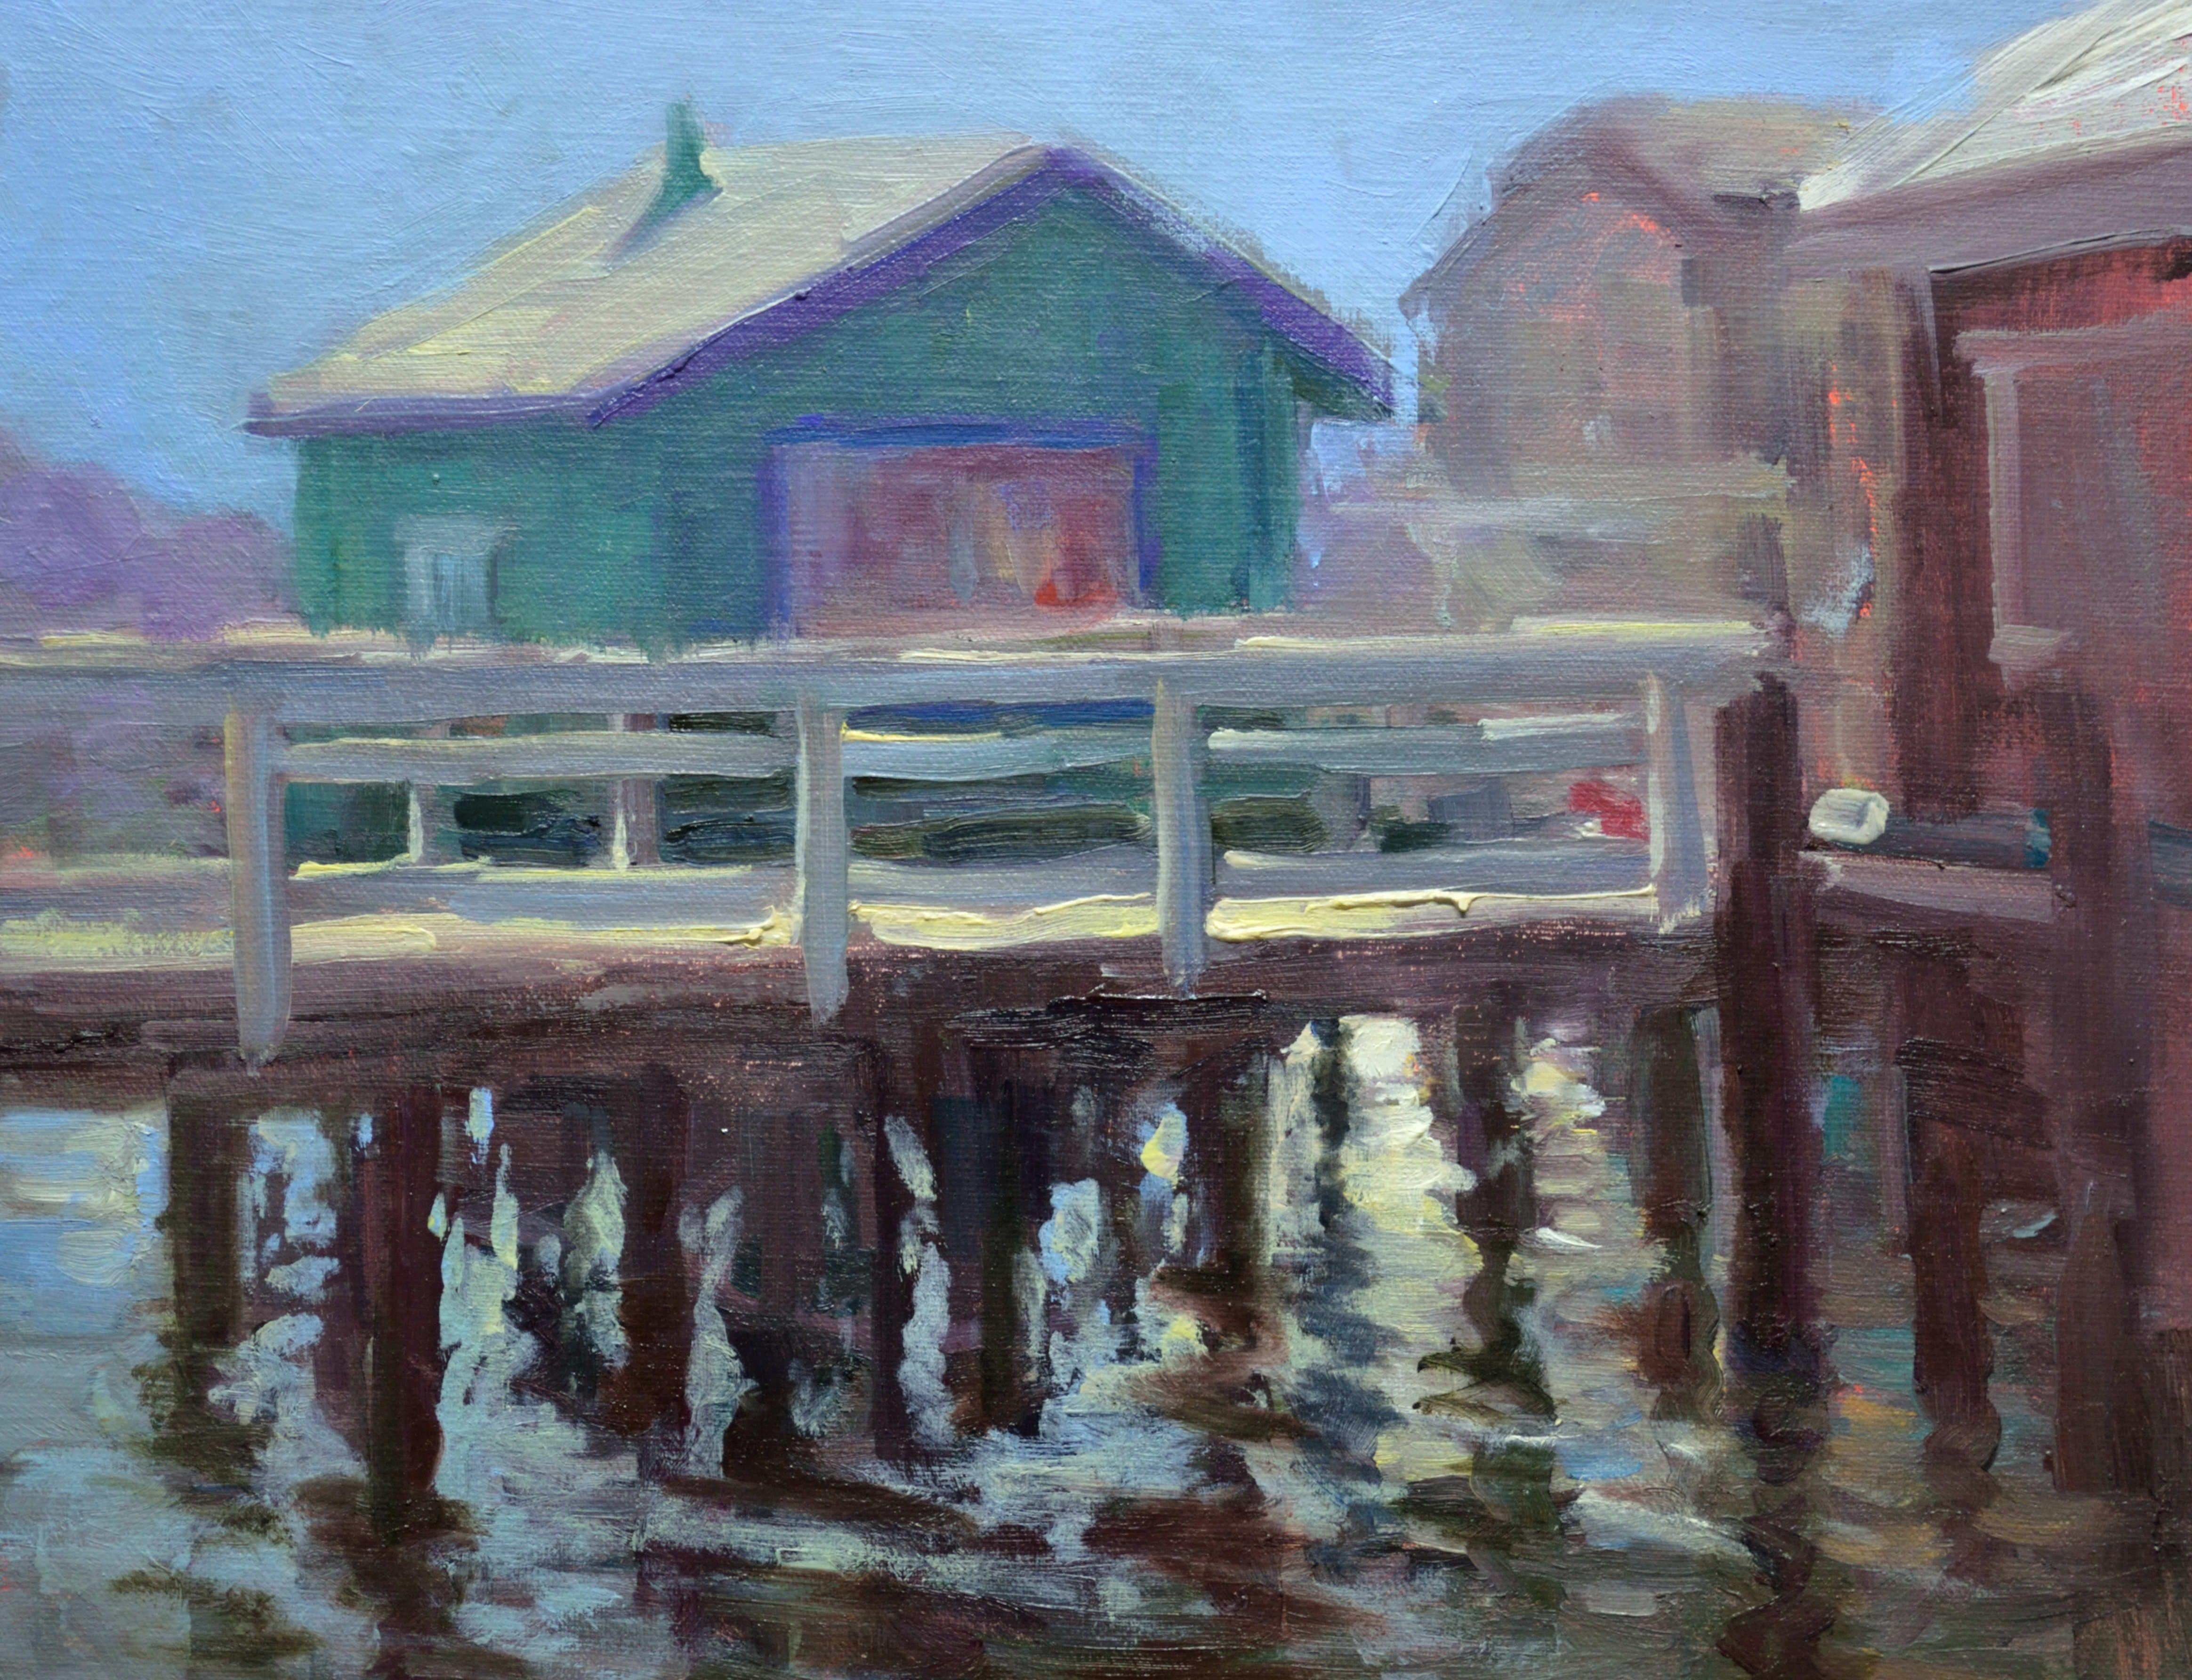 Oil on linen mounted on gatorboard. It is available unframed. :: Painting :: Impressionist :: This piece comes with an official certificate of authenticity signed by the artist :: Ready to Hang: No :: Signed: Yes :: Signature Location: Front and